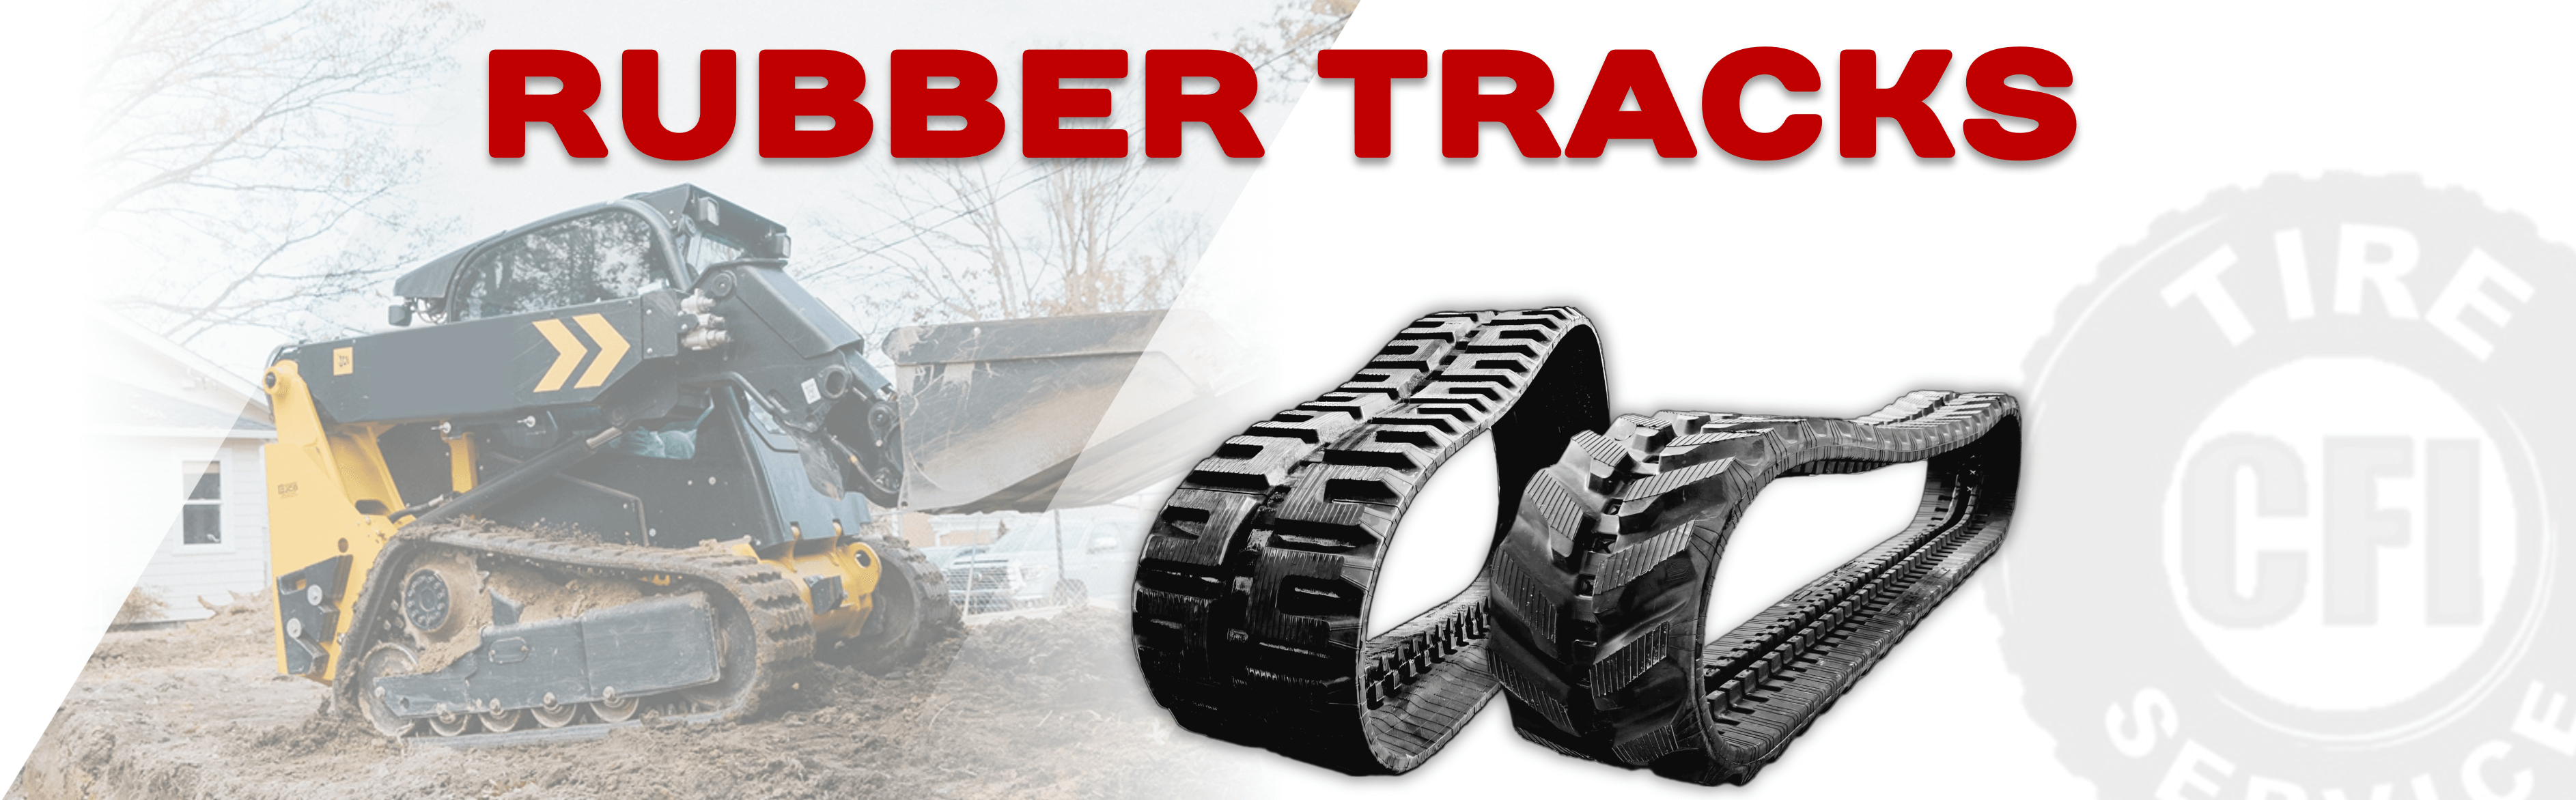 Shop for New Equipment Tracks in Council Bluffs and Glenwood, IA